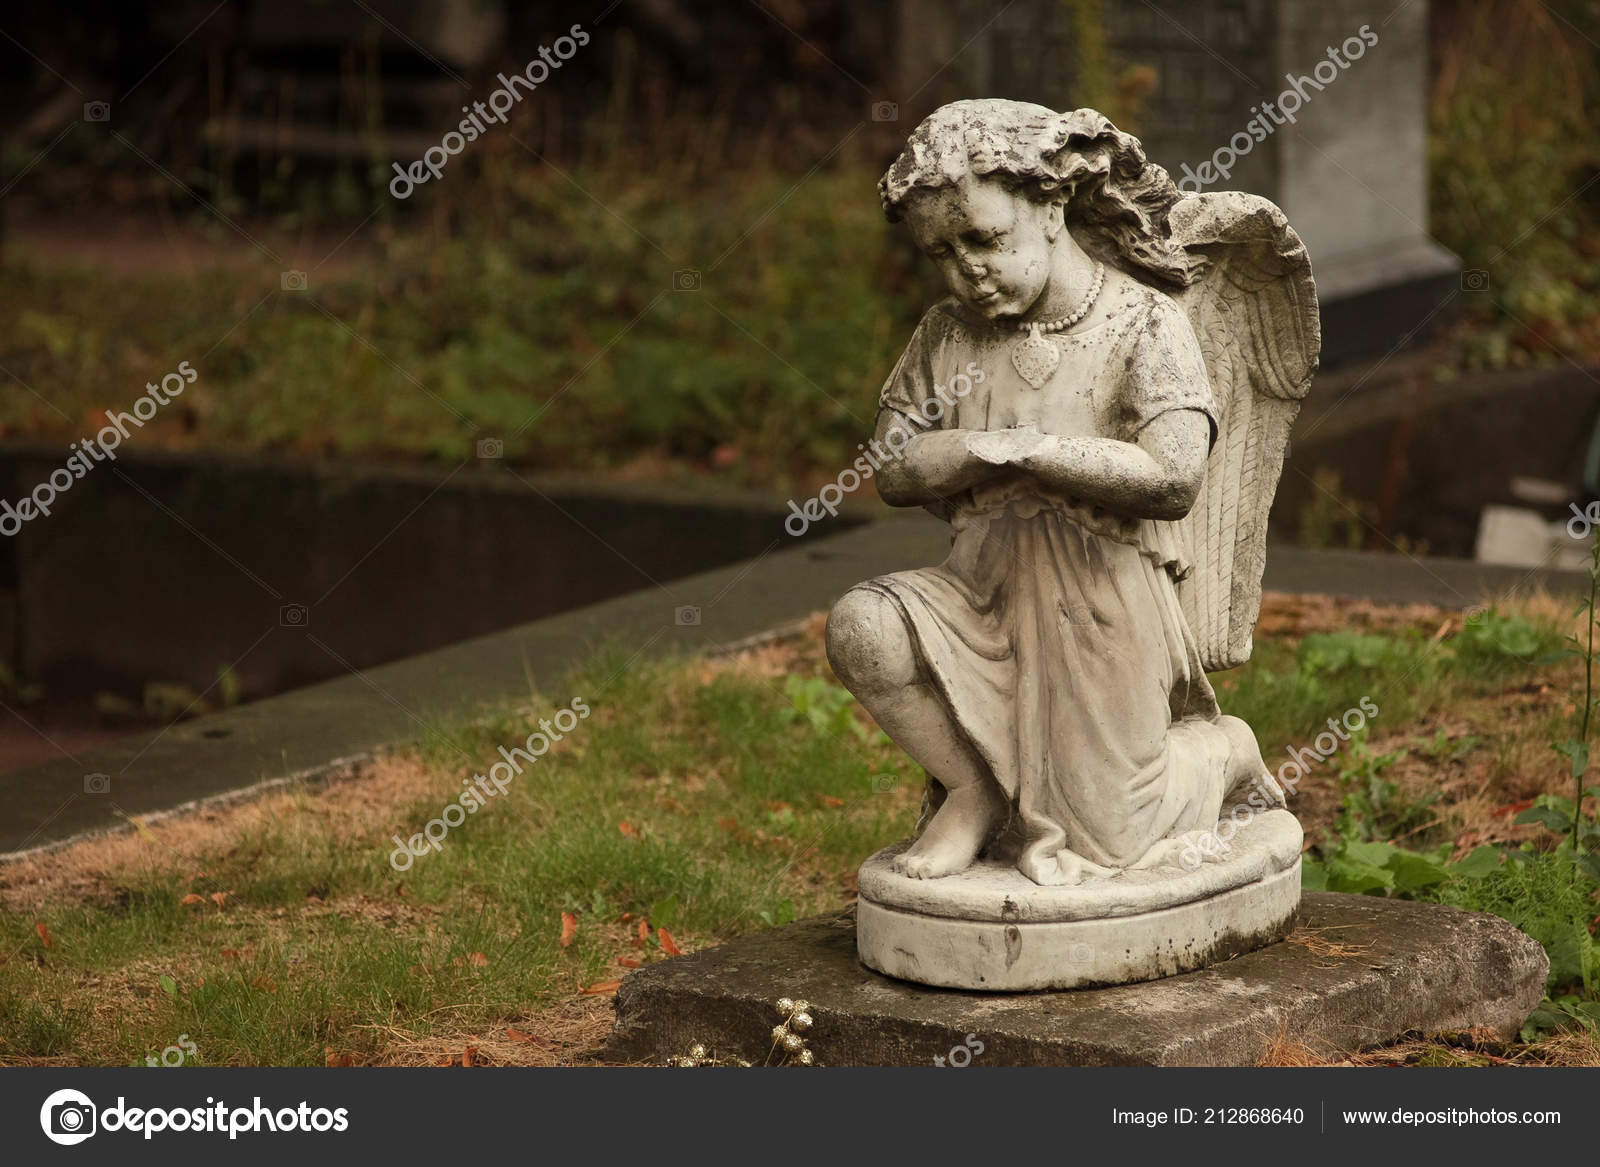 Statue Of A Weeping Angel In A Cemetery Stock Photo